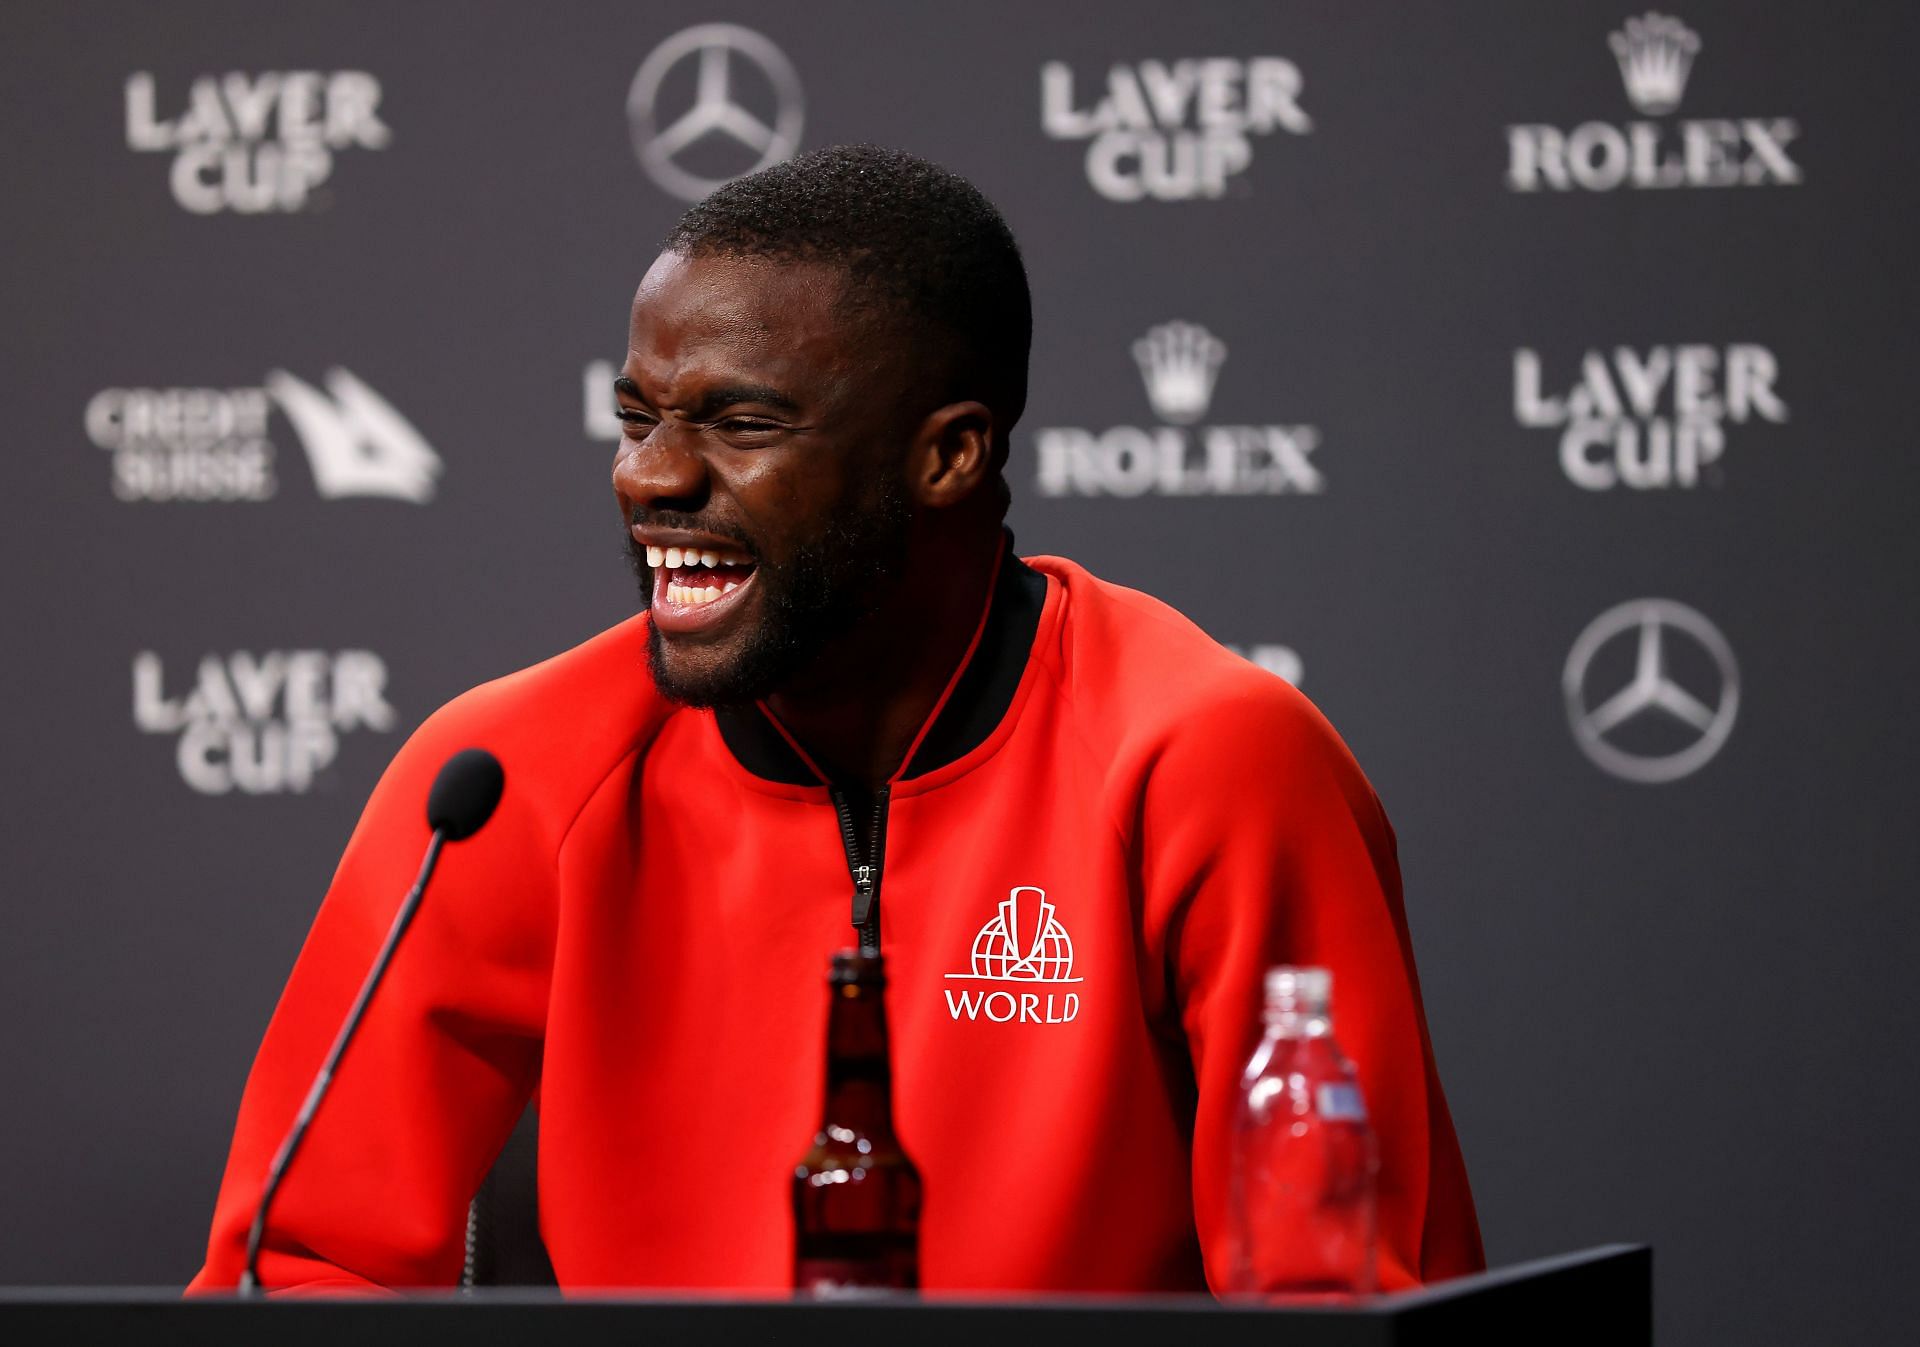 Tiafoe at the 2022 Laver Cup